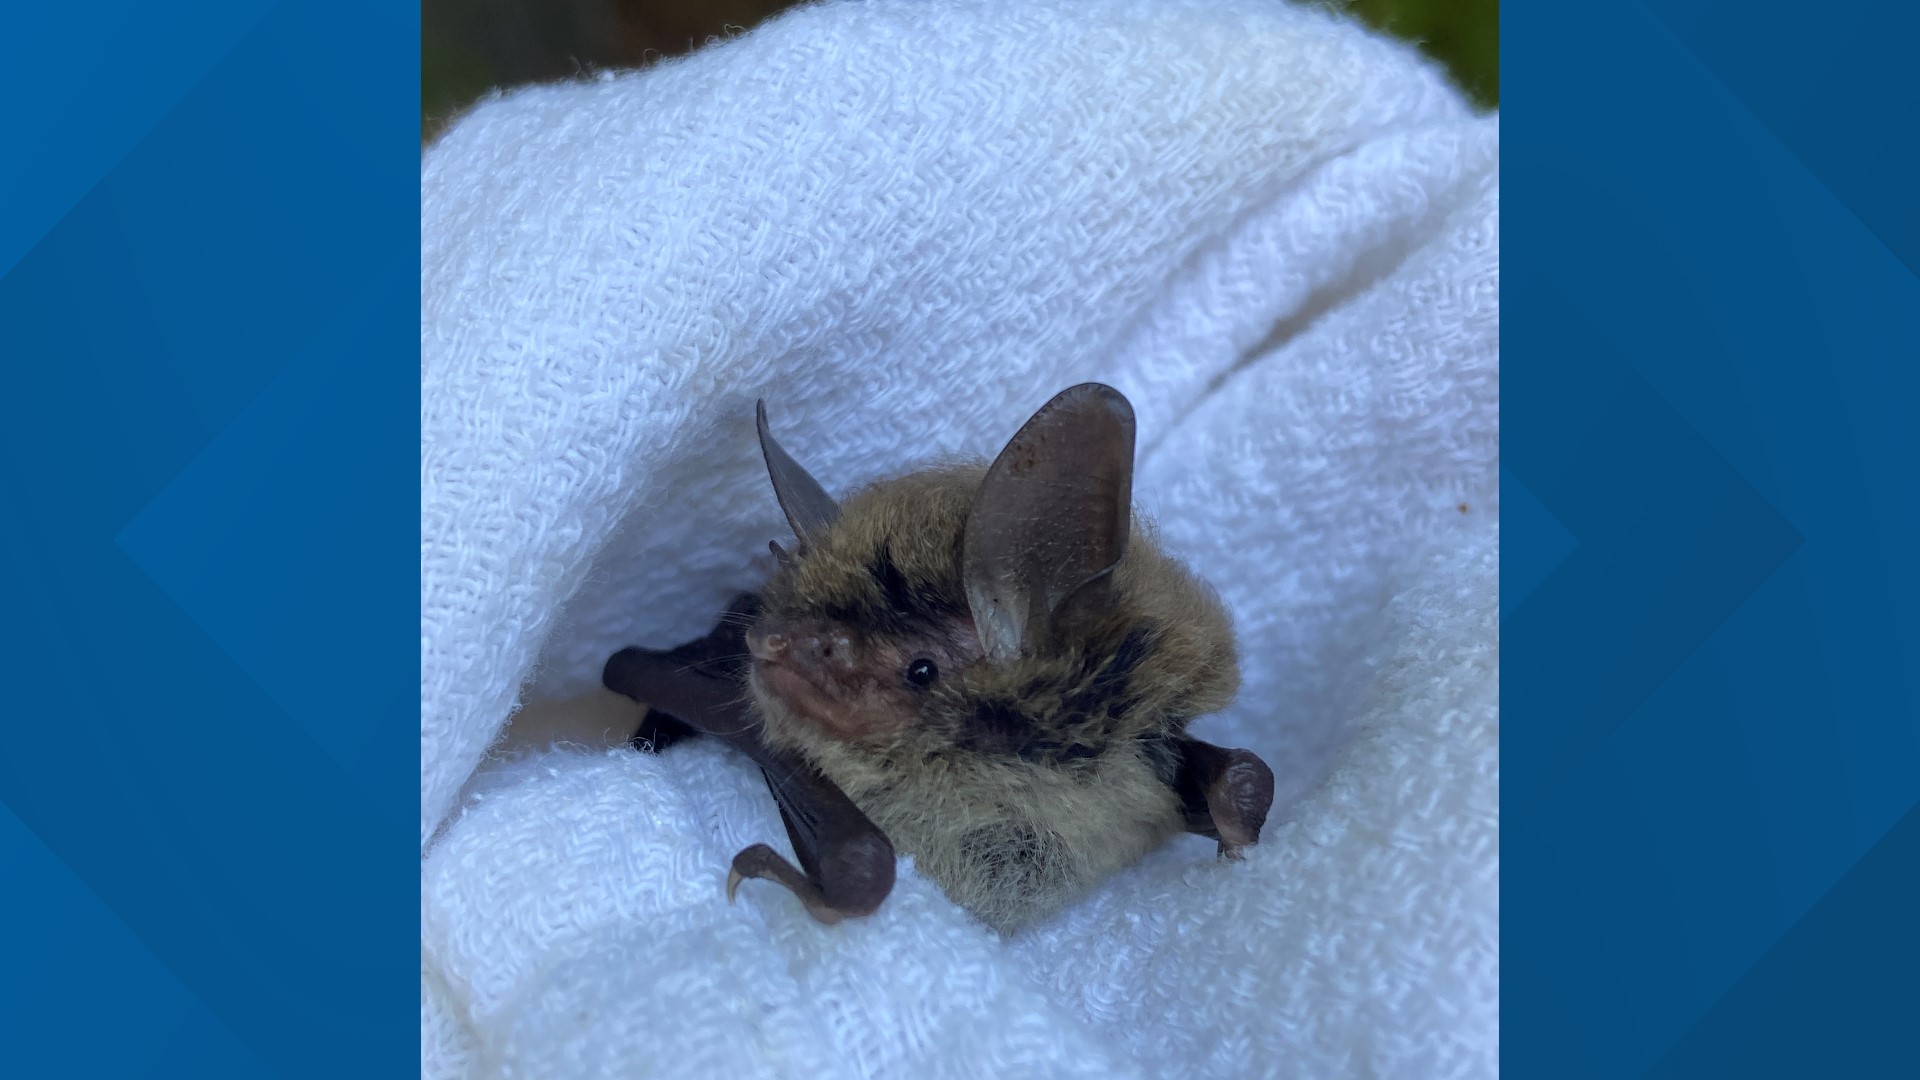 The northern long-eared bat population has been steadily decreasing, even up to 99% in some areas of Pennsylvania. But, why?